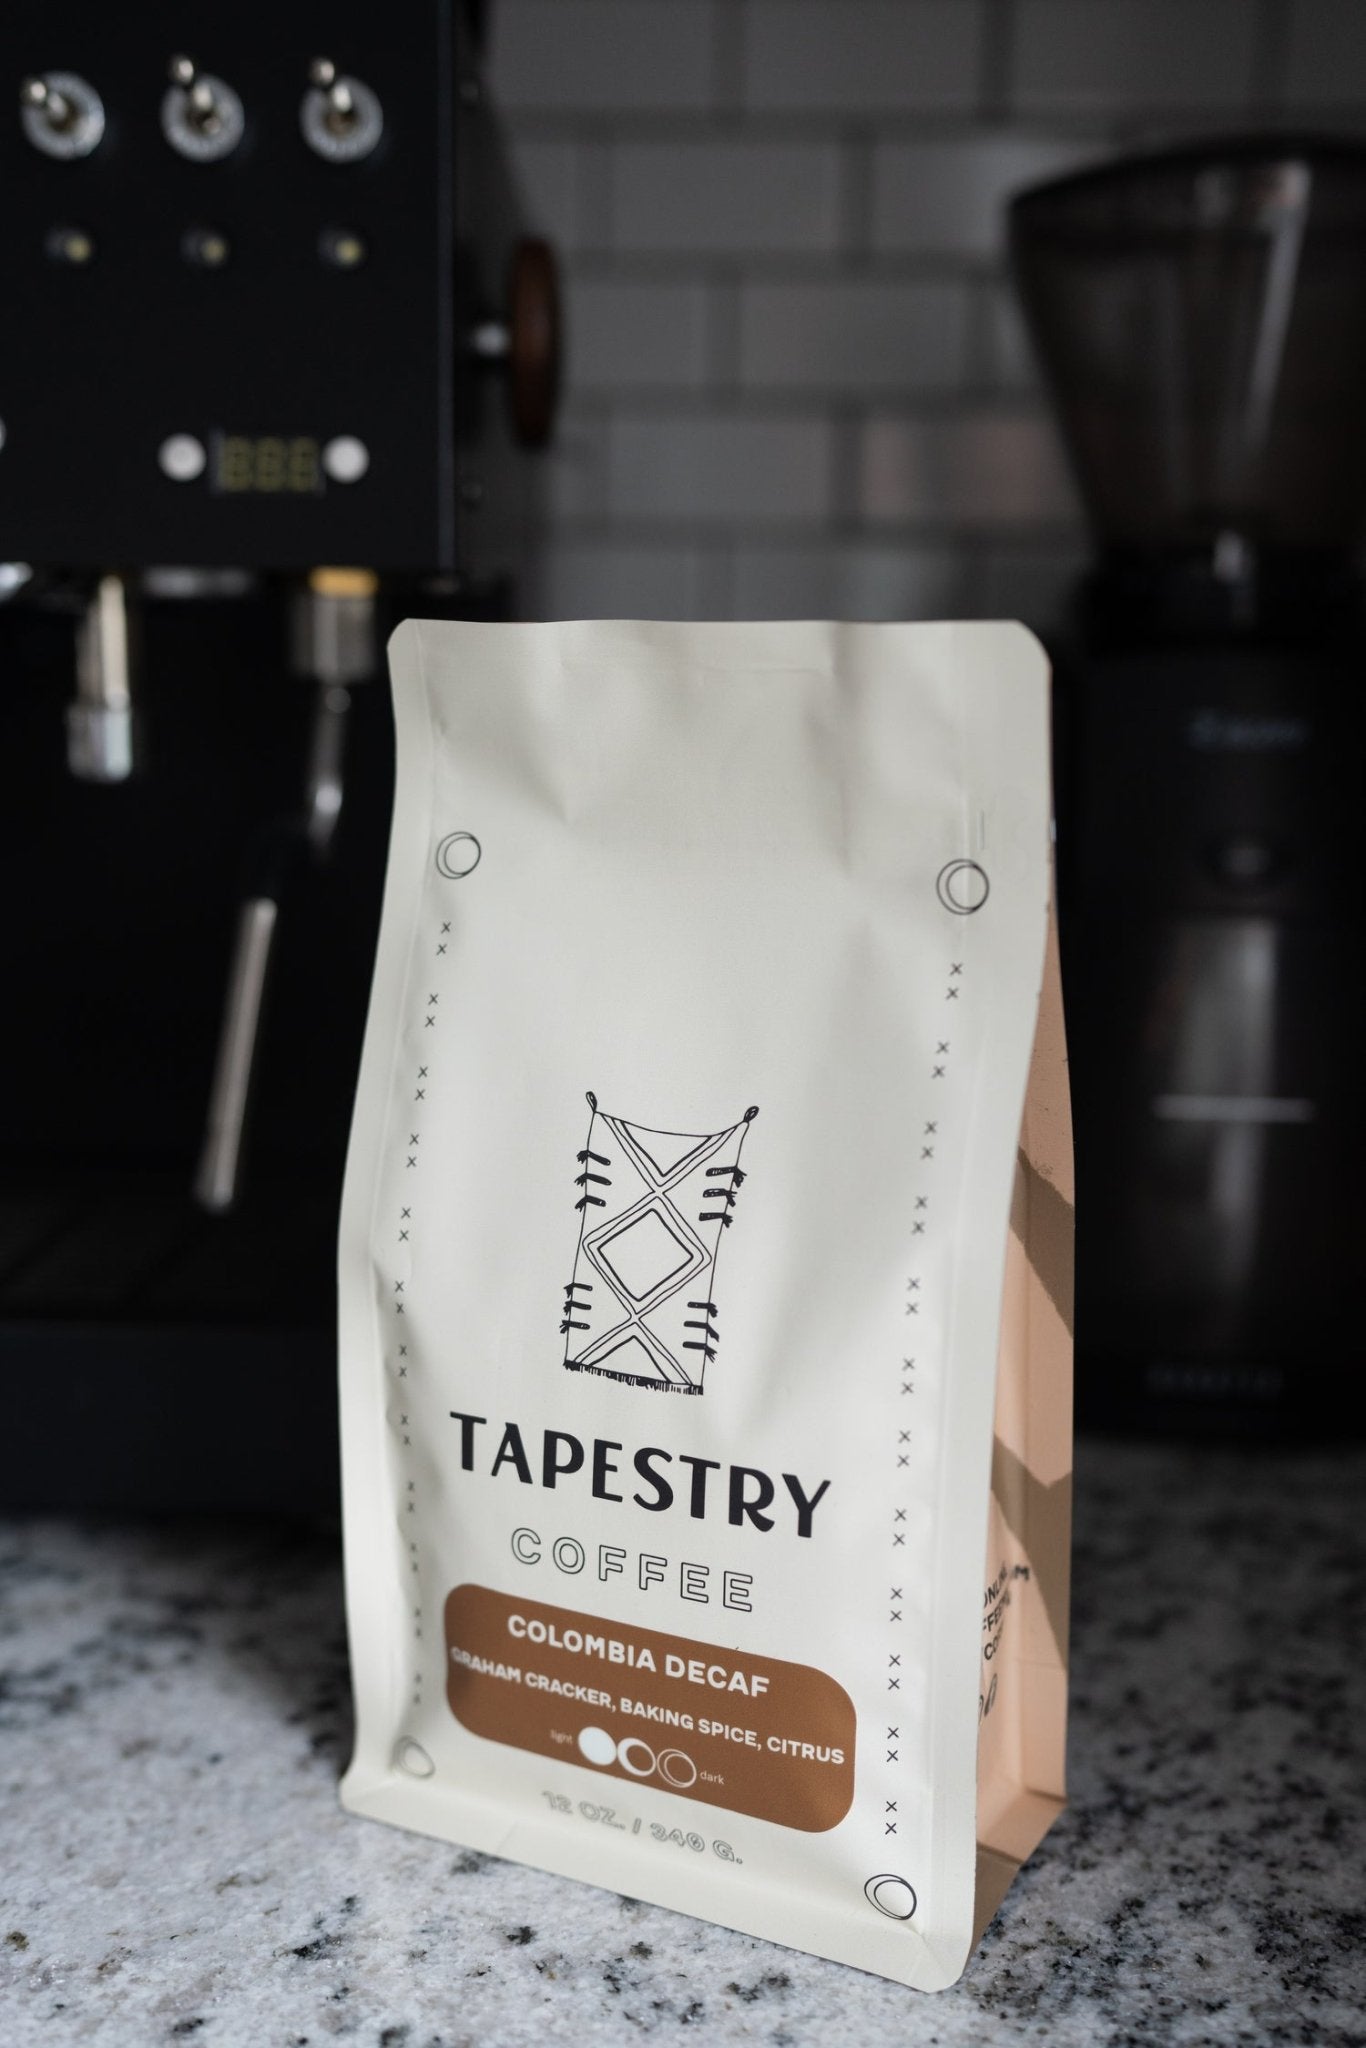 Monthly Coffee Subscription - Tapestry Coffee